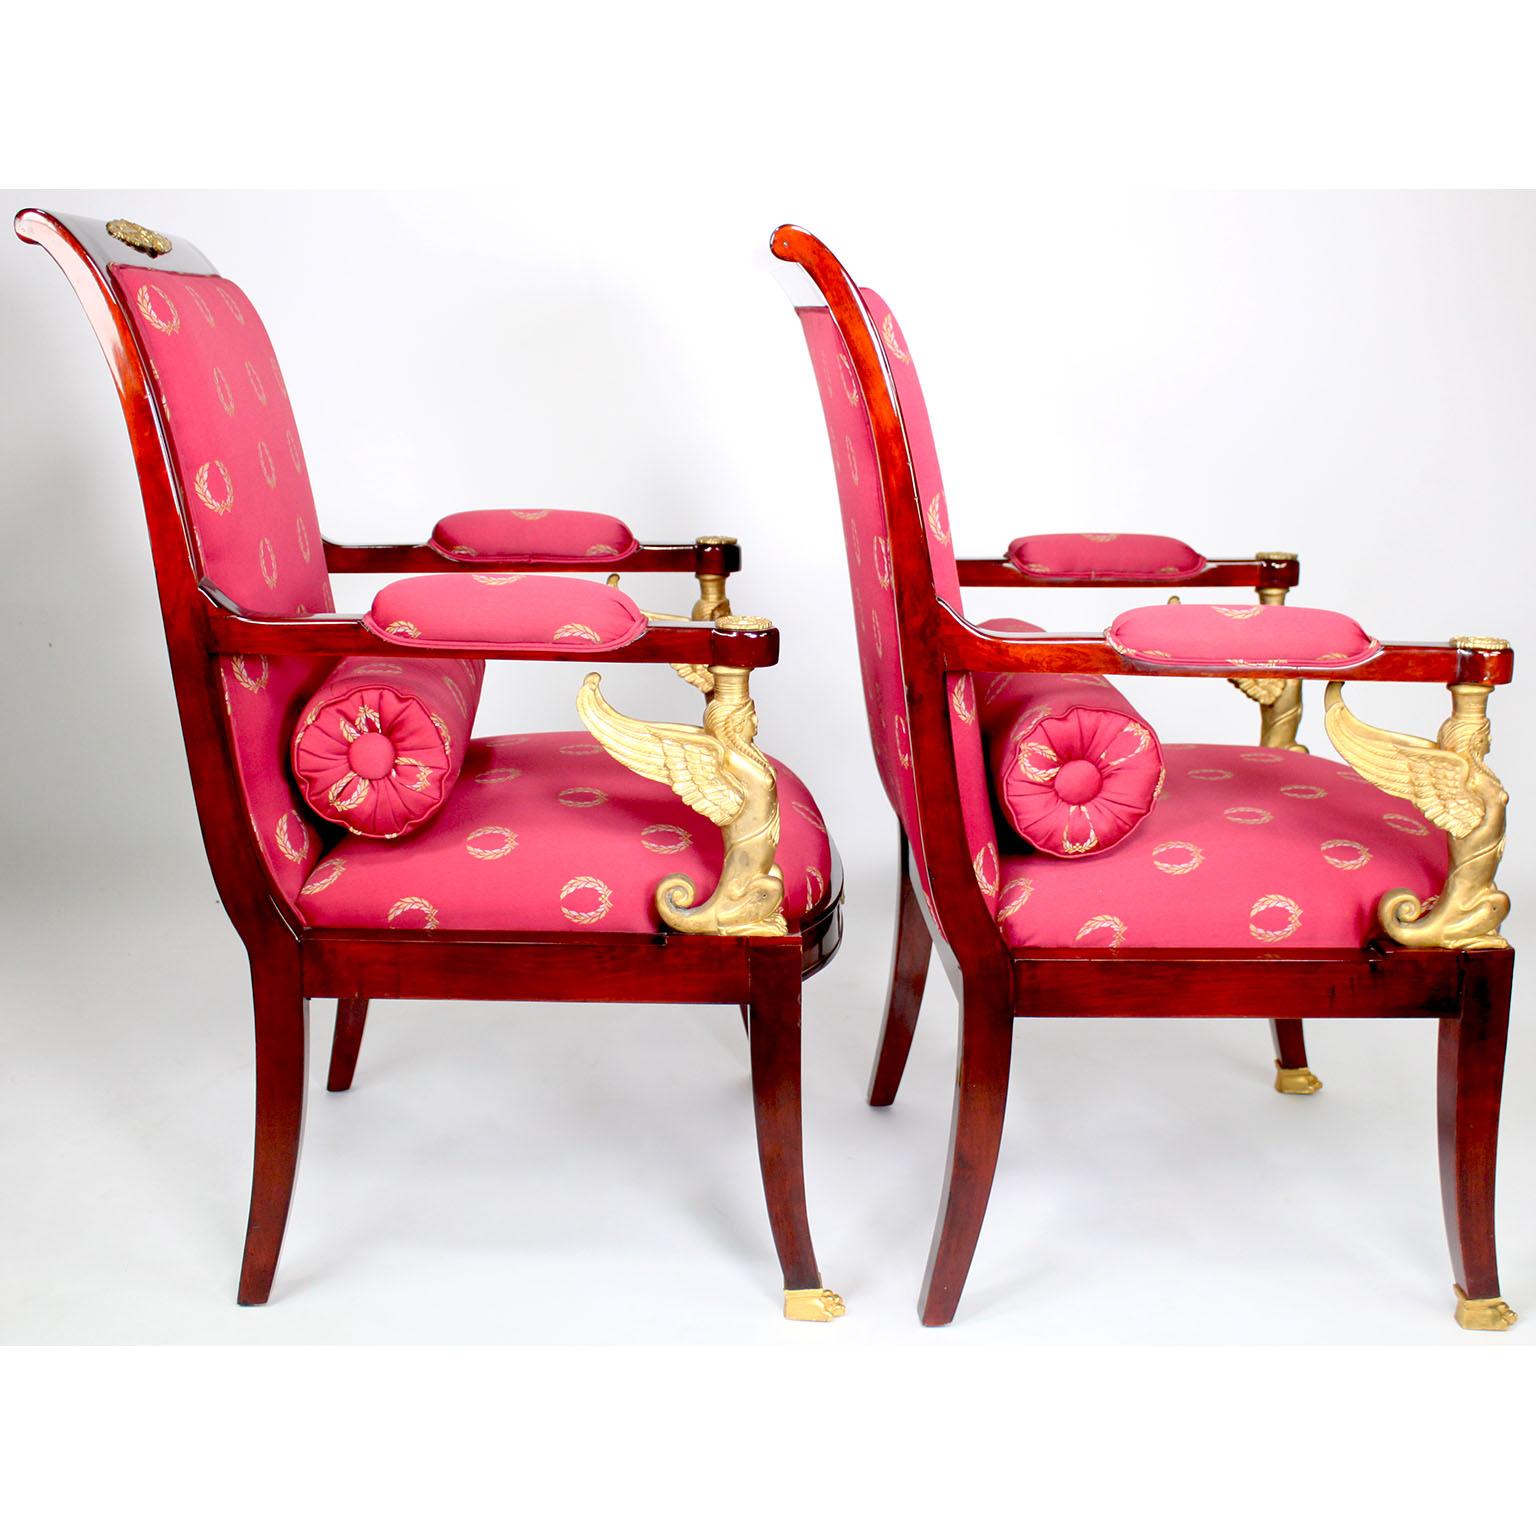  French Empire Revival Style 5 Piece Mahogany & Gilt-Bronze Sphinxes Salon Suite For Sale 13